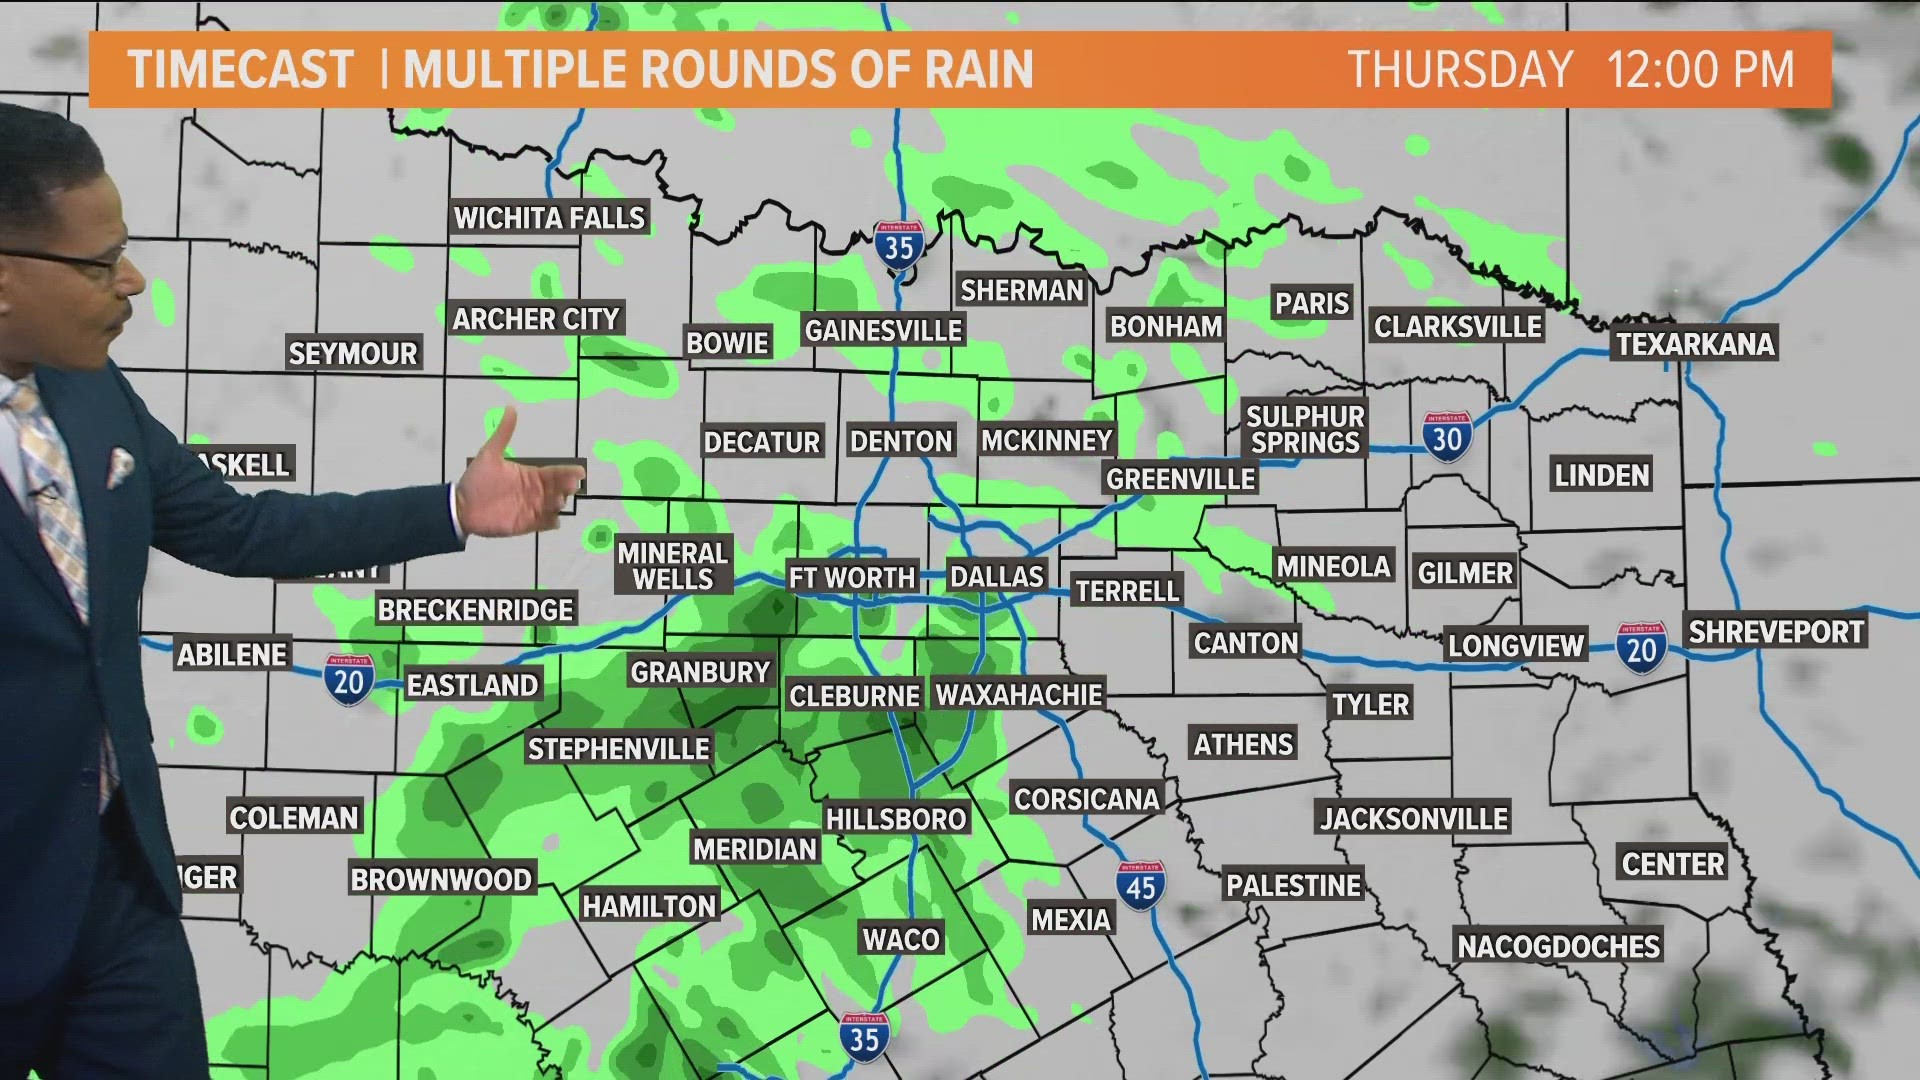 Multiple rounds of rain are heading to North Texas Thursday through Christmas Day.